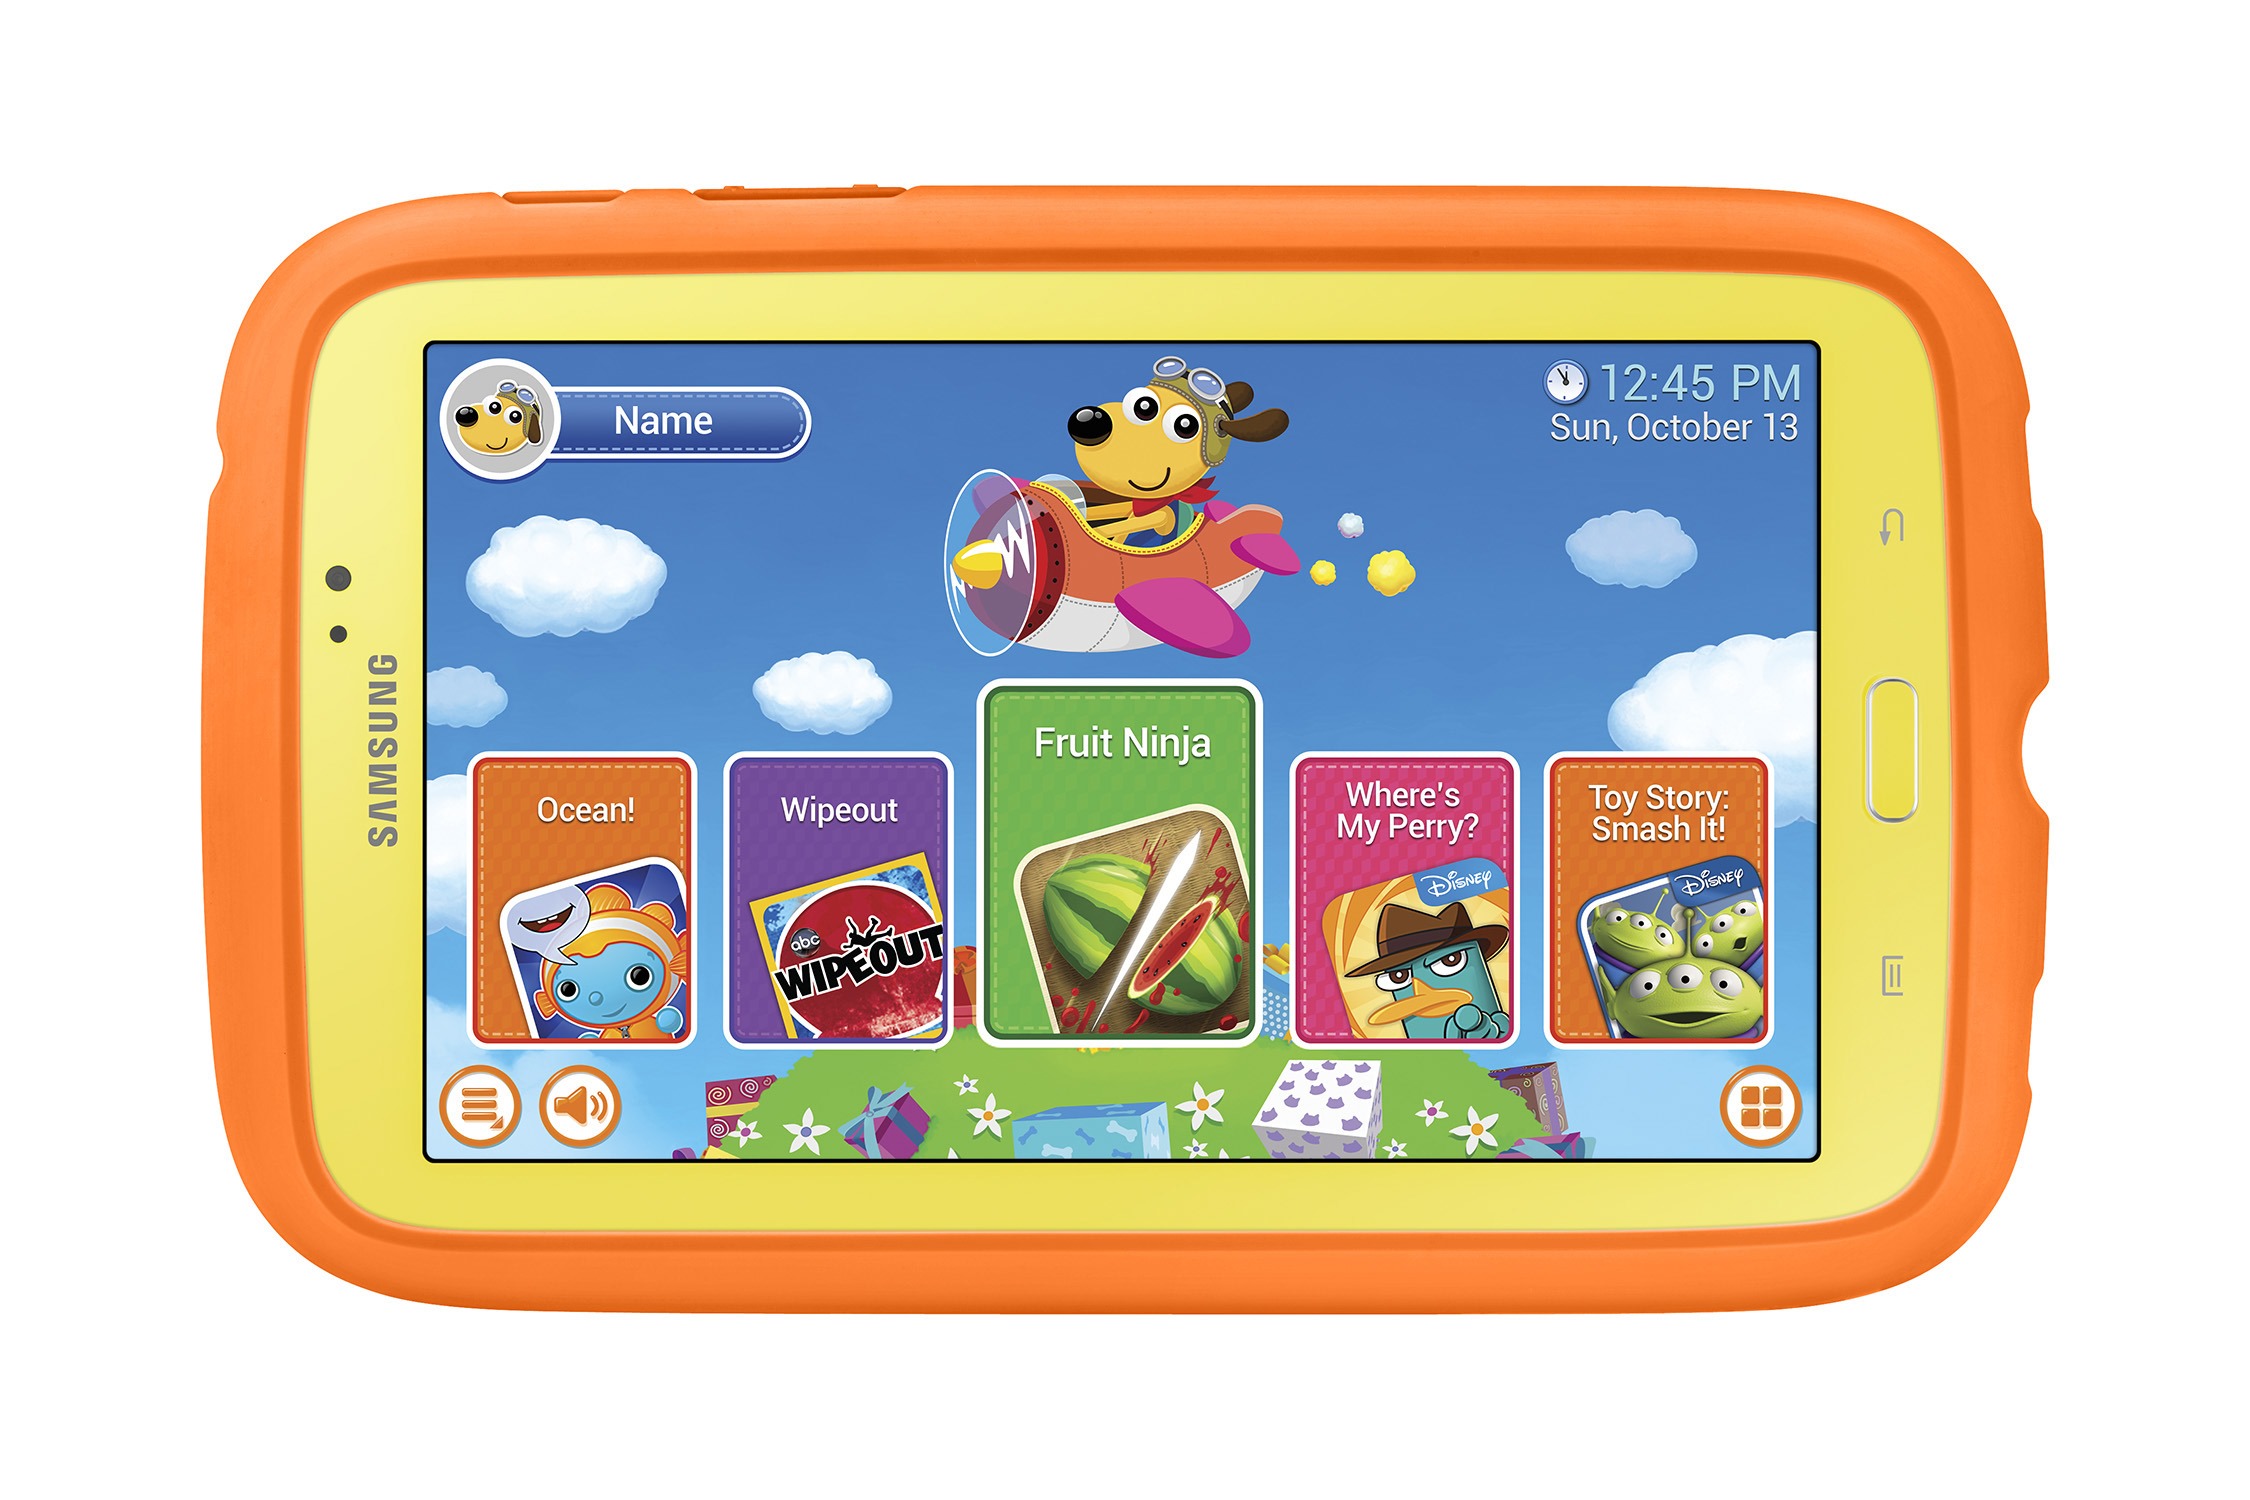 Samsung To Release ‘Galaxy Tab 3 Kids’ Tablet November 10th